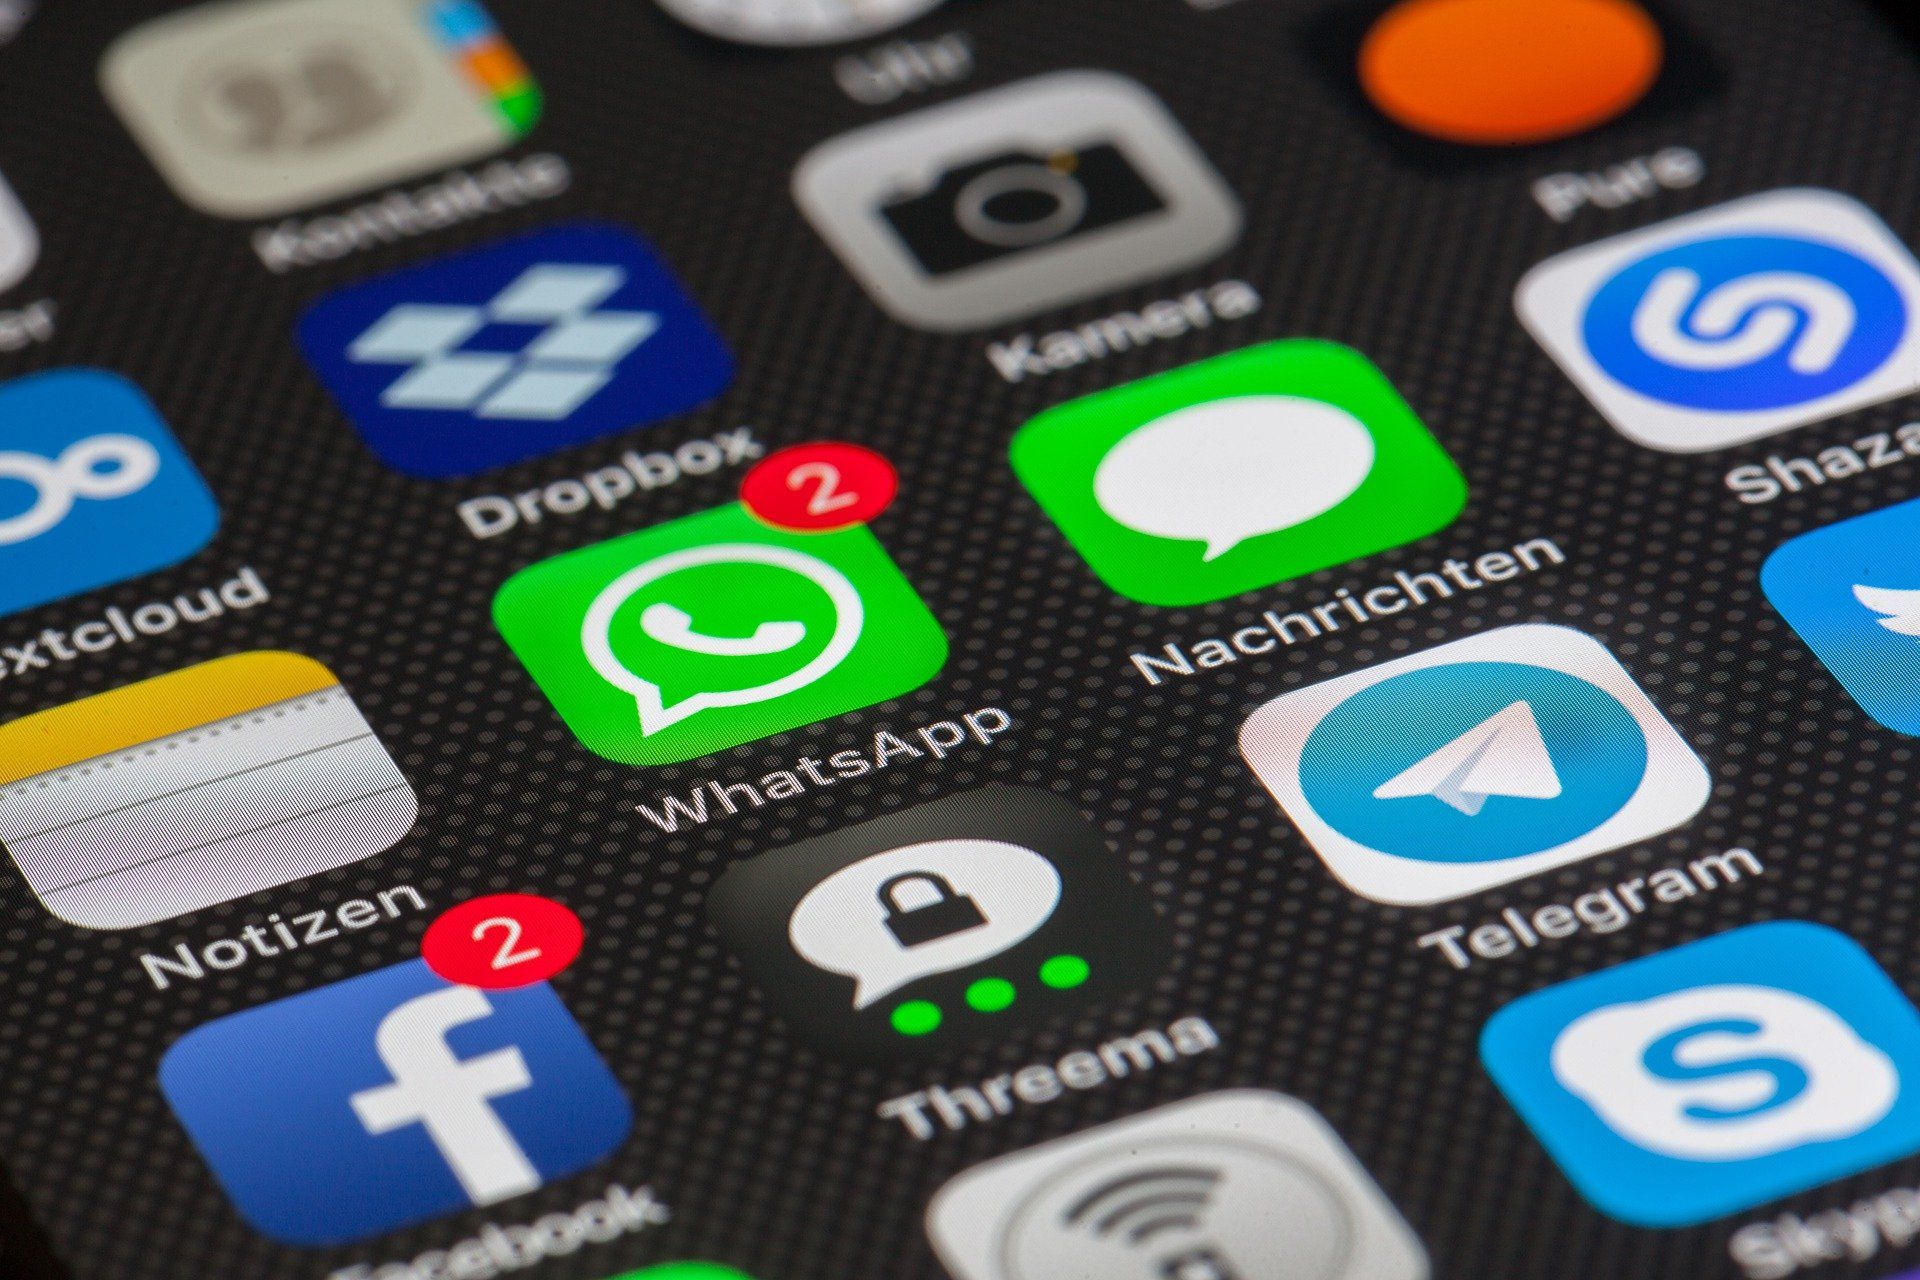 We don’t share chats, location with Facebook: WhatsApp clarifies on new privacy policy